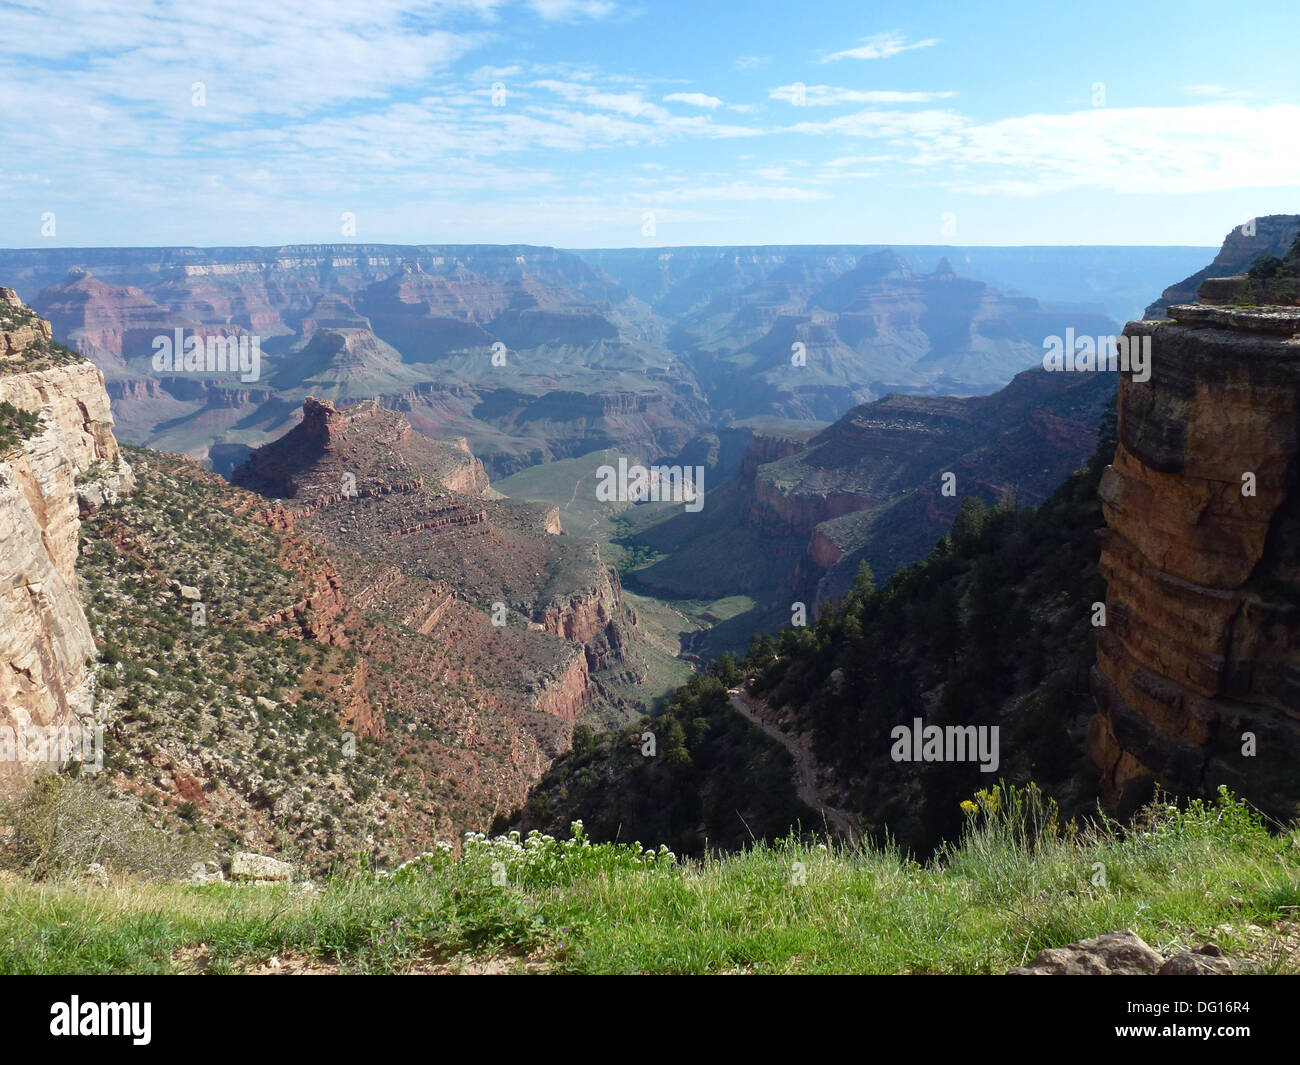 the Grand Canyon from the South Rim, USA. 06th Sep, 2013. View of the Grand Canyon from the South Rim, USA, 06 September 2013. On 11 January 1908 the area around the Grand Canyon was declared a national monument and on 26 February 1919 it was put under protection as a national park. In 1979, the Grand Canyon was included in the UNESCO list of World Natural Heritage. Photo: Alexandra Schuler/dpa/Alamy Live News Stock Photo